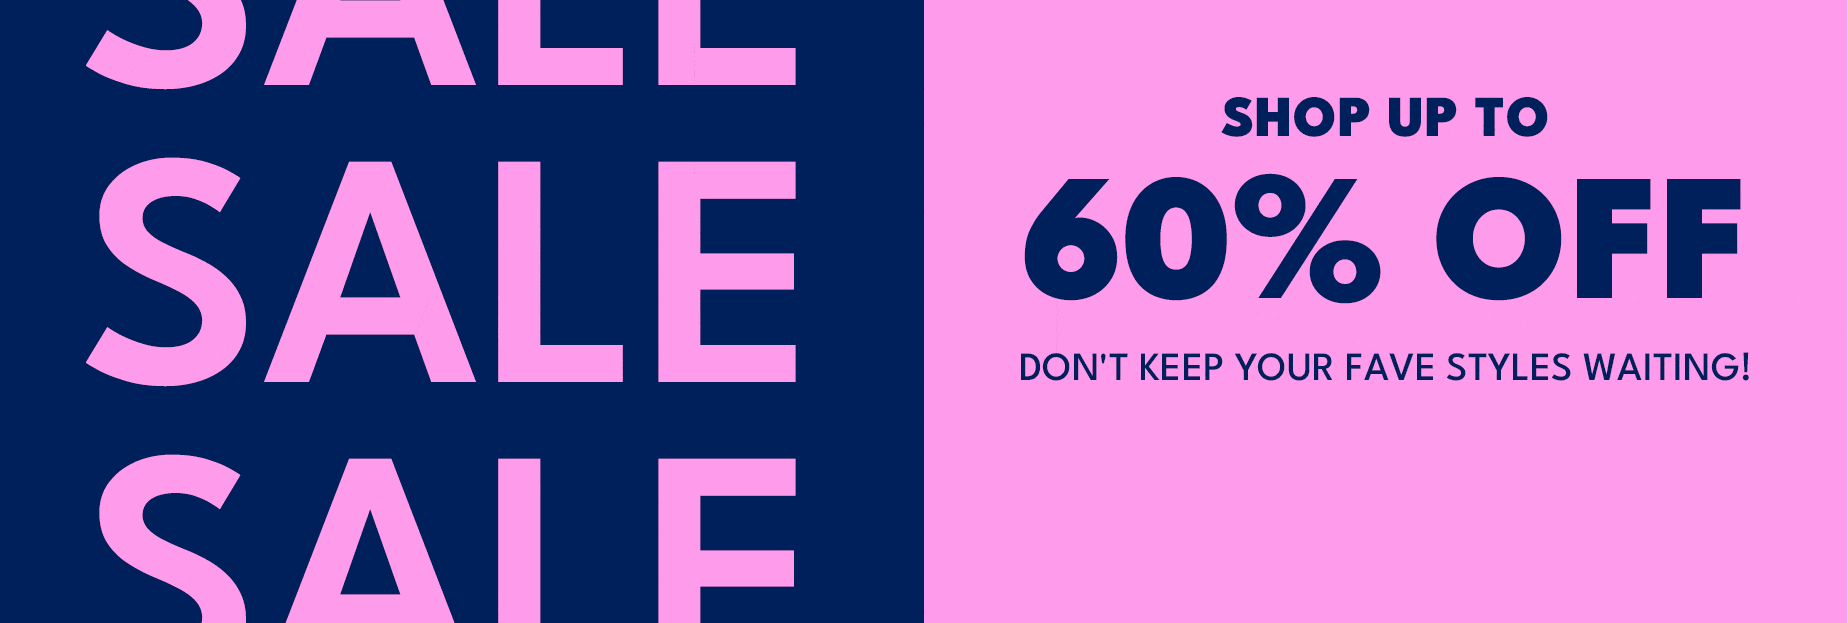 SHop up to 60% off don't keep your fave styles waiting! CLICK IN OR MISS OUT!